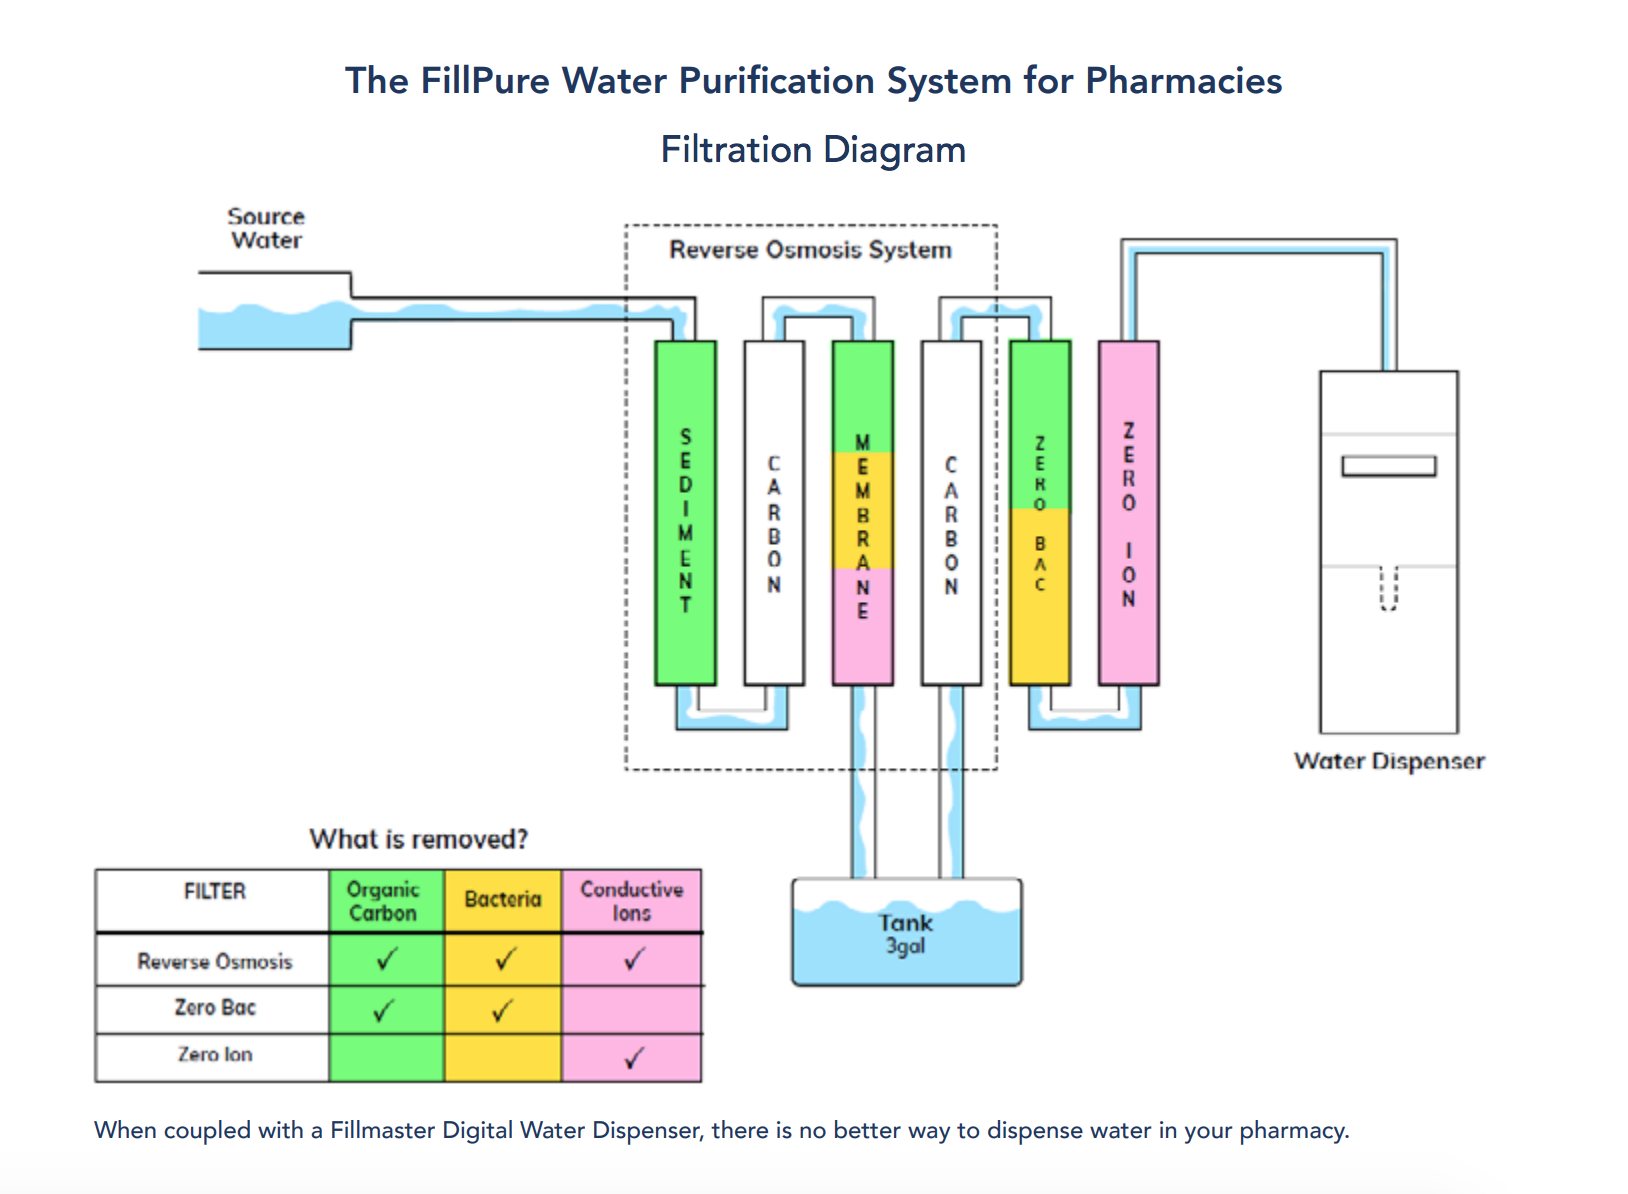 The FillPure Water Purification System for Pharmacies Filtration Diagram